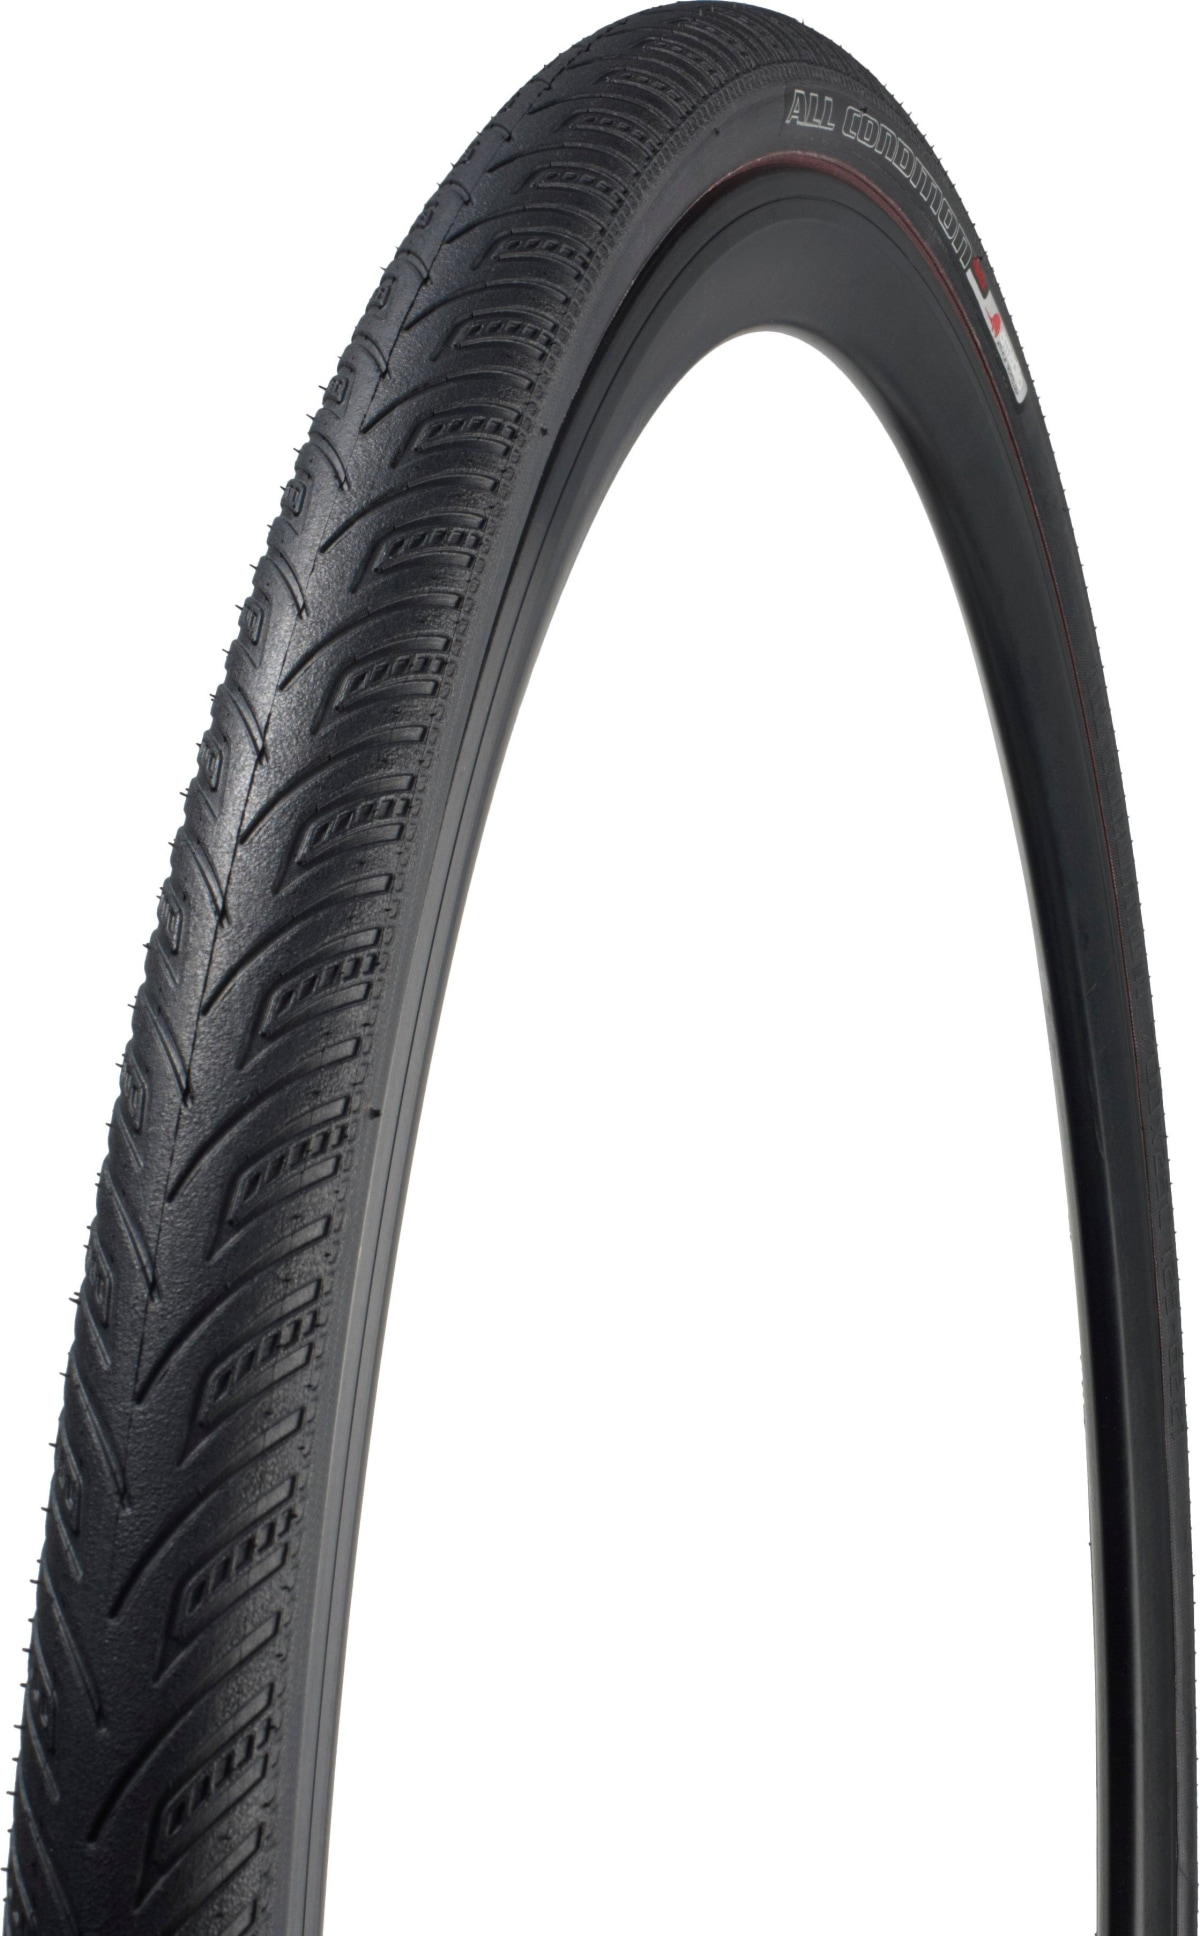 Cycles UK Specialized  All Condition Armadillo Road Tyres 700 X 25 Black